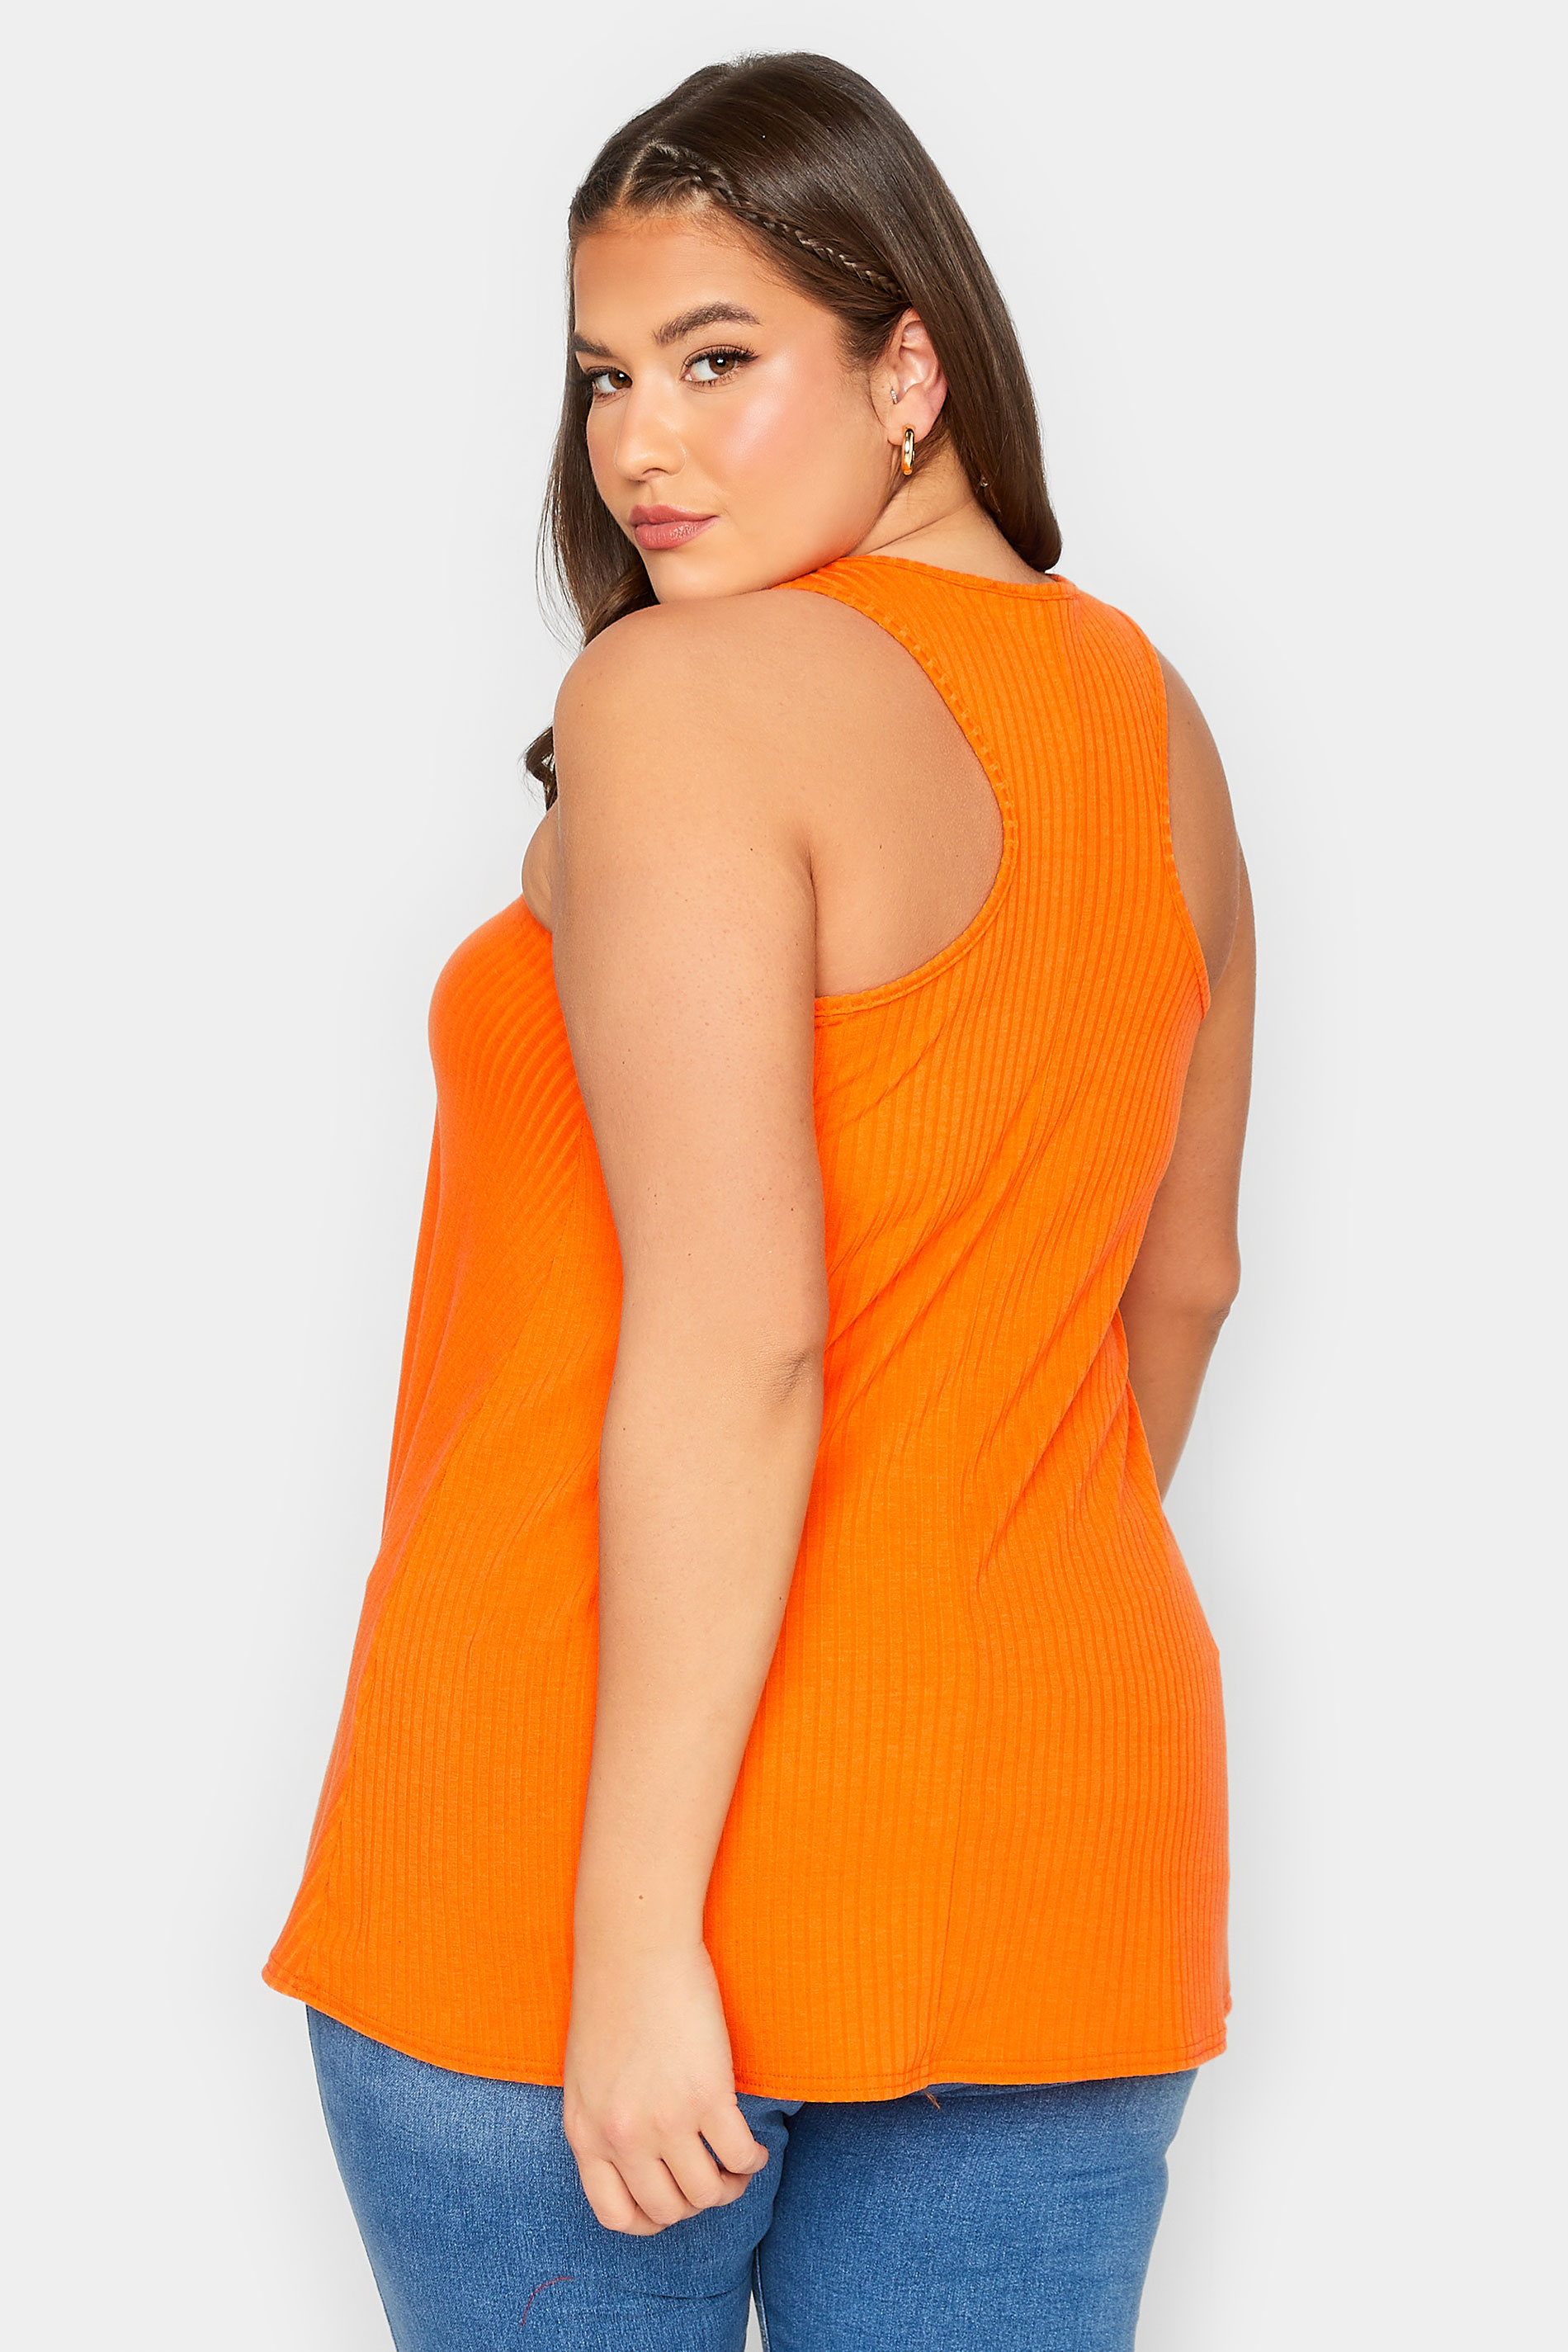 LIMITED COLLECTION Plus Size Orange Ribbed Racer Cami Vest Top | Yours Clothing  3